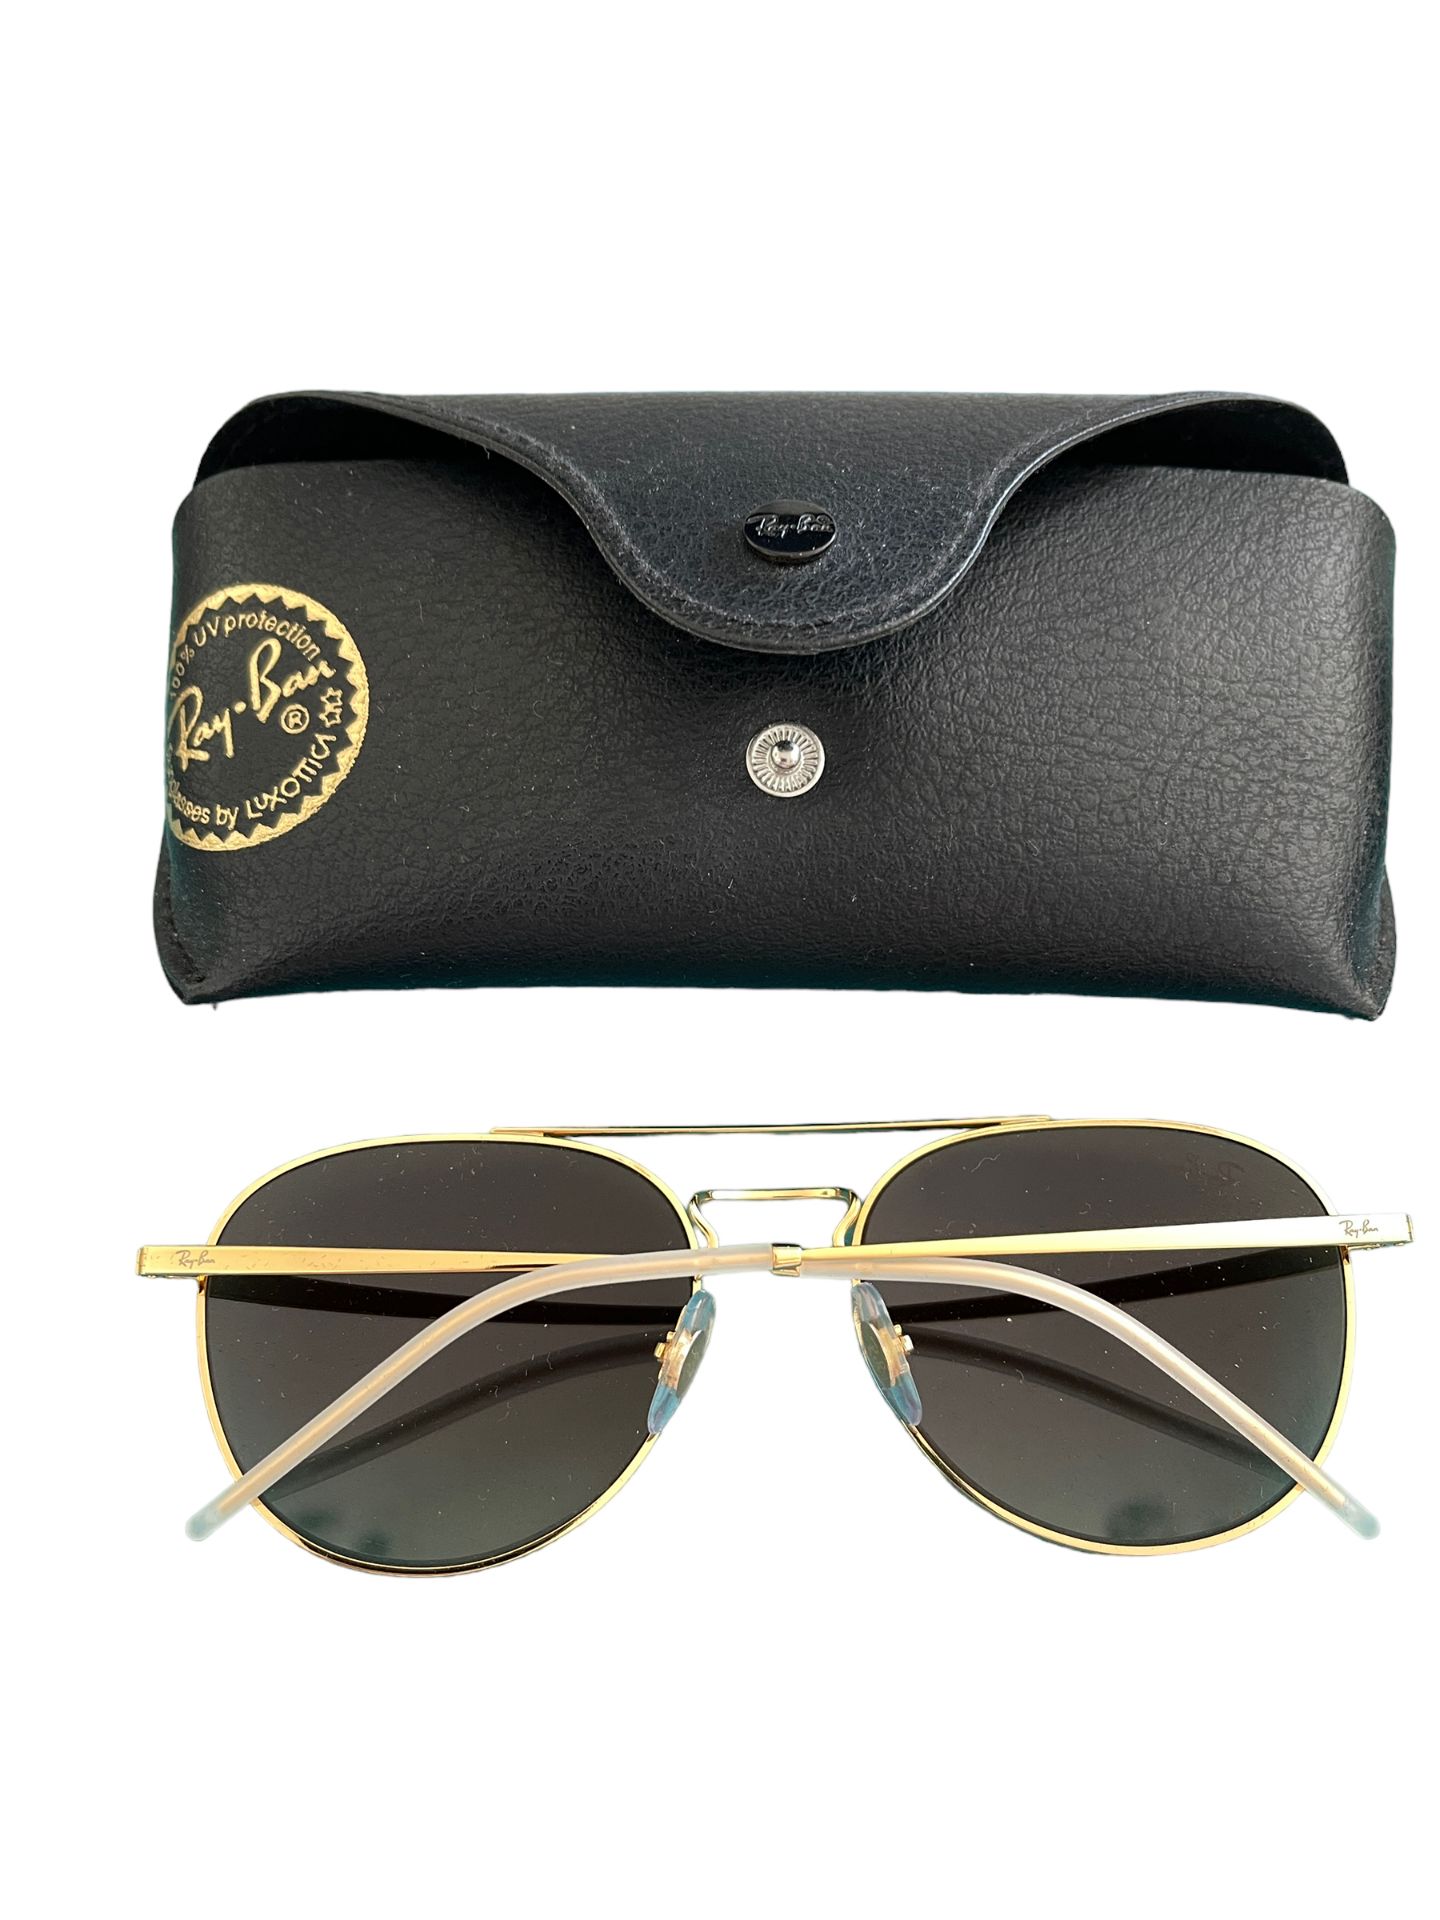 Lost property Ray Ban Sunglasses - Image 3 of 3